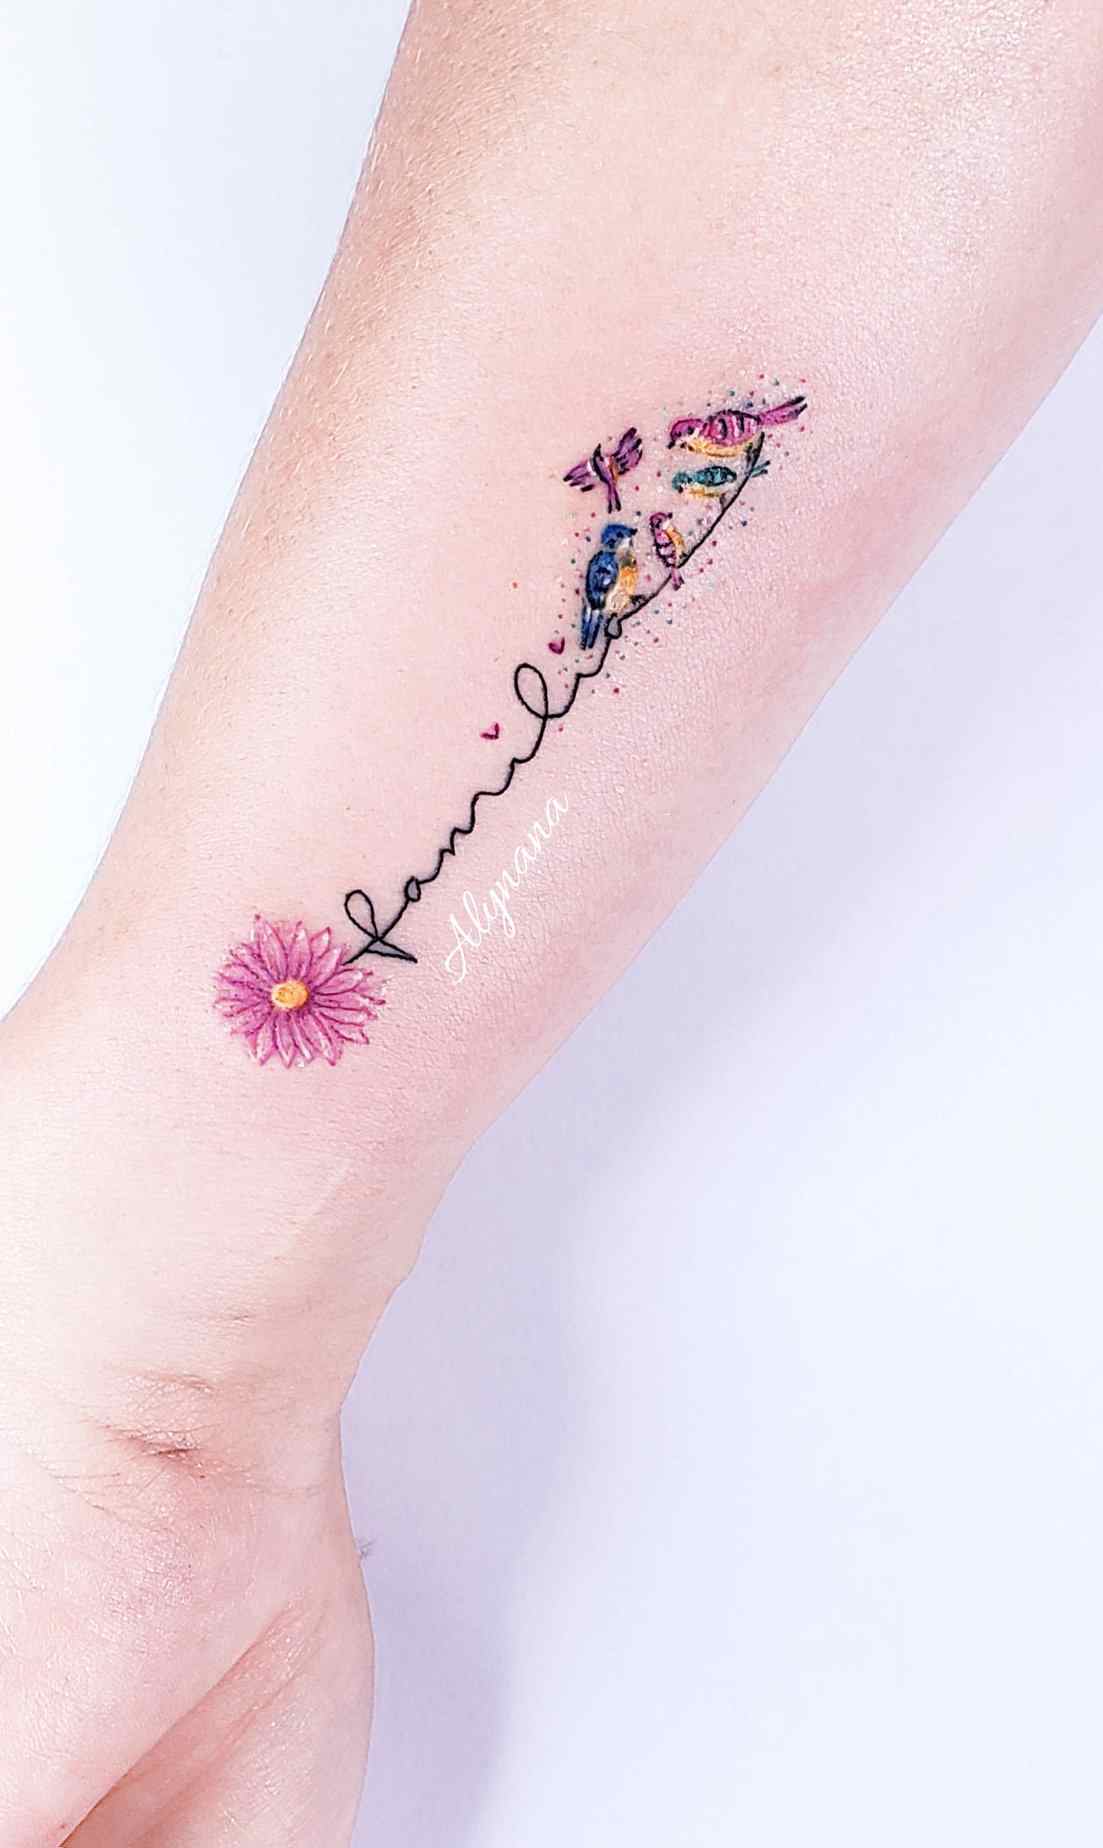 100 Delicate Colorful Tattoos Artist Alynana Family represented with birds on the forearm with flowers